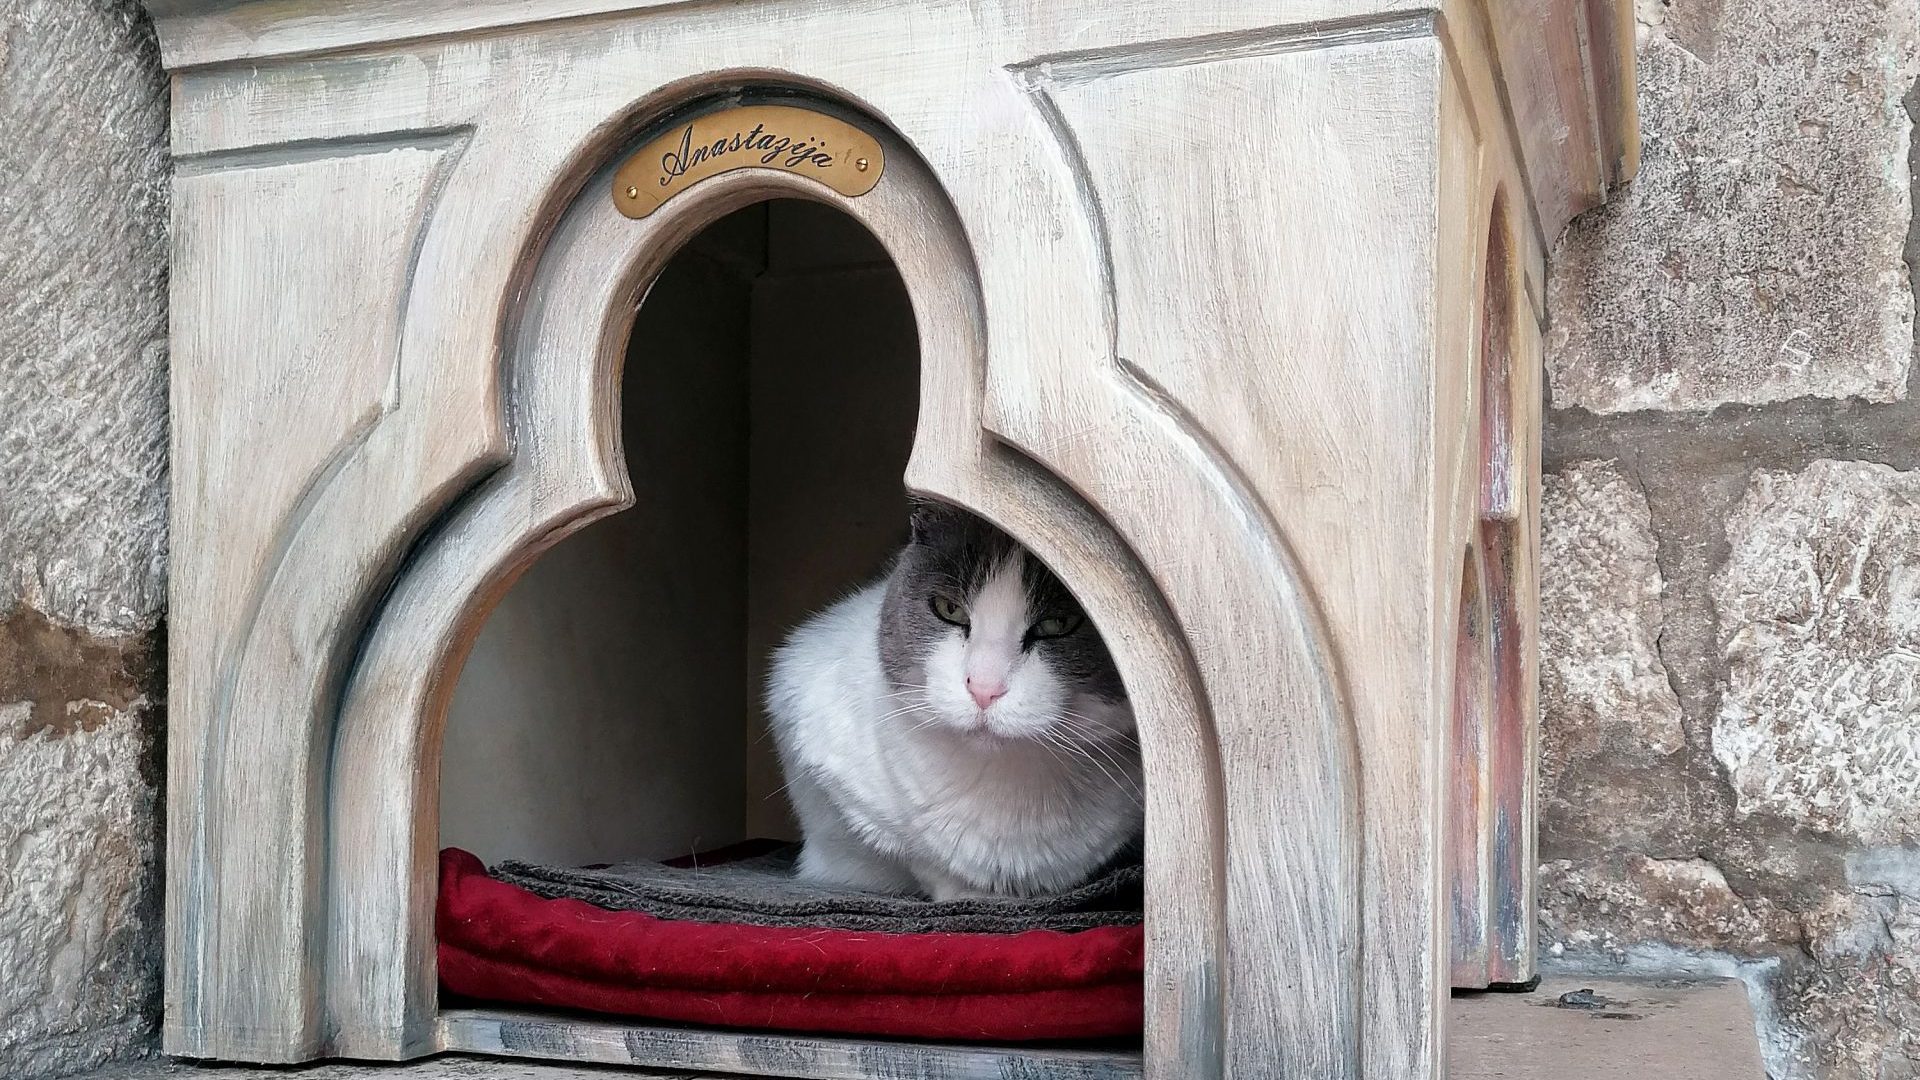 Anastasia, the 17-year-old stray cat, faces eviction from 
her ornate home in Dubrovnik. Photo: Maris Sisevic/AFP/Getty